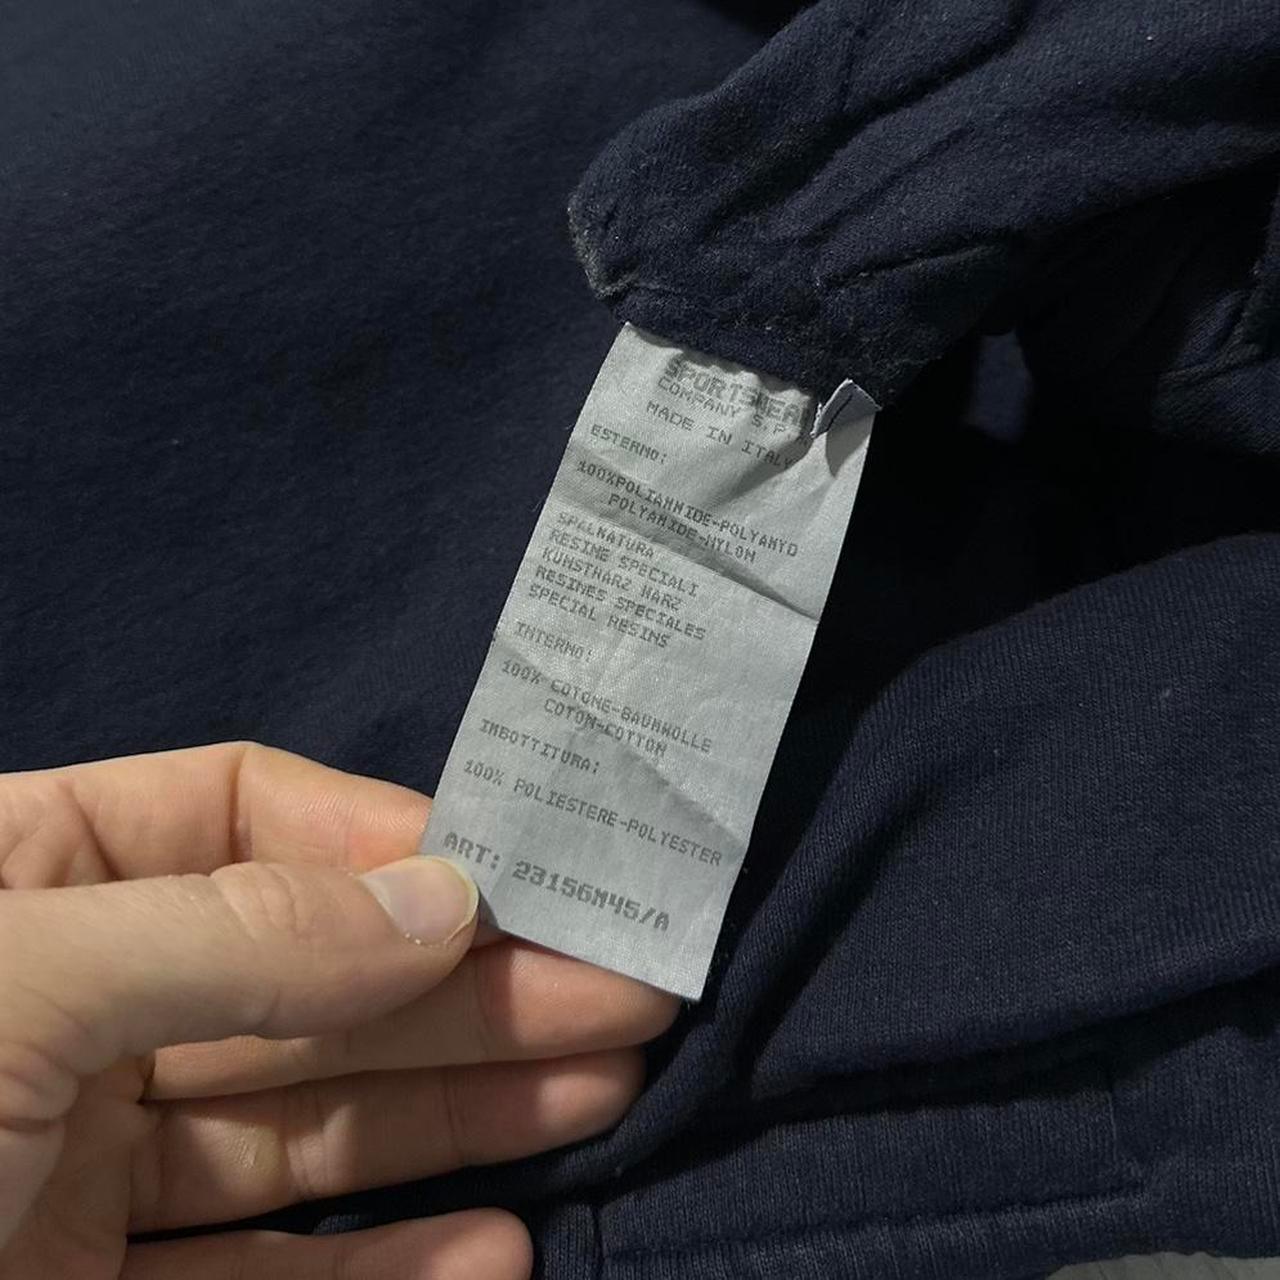 Stone Island 1995 Reversible Jacket - Known Source